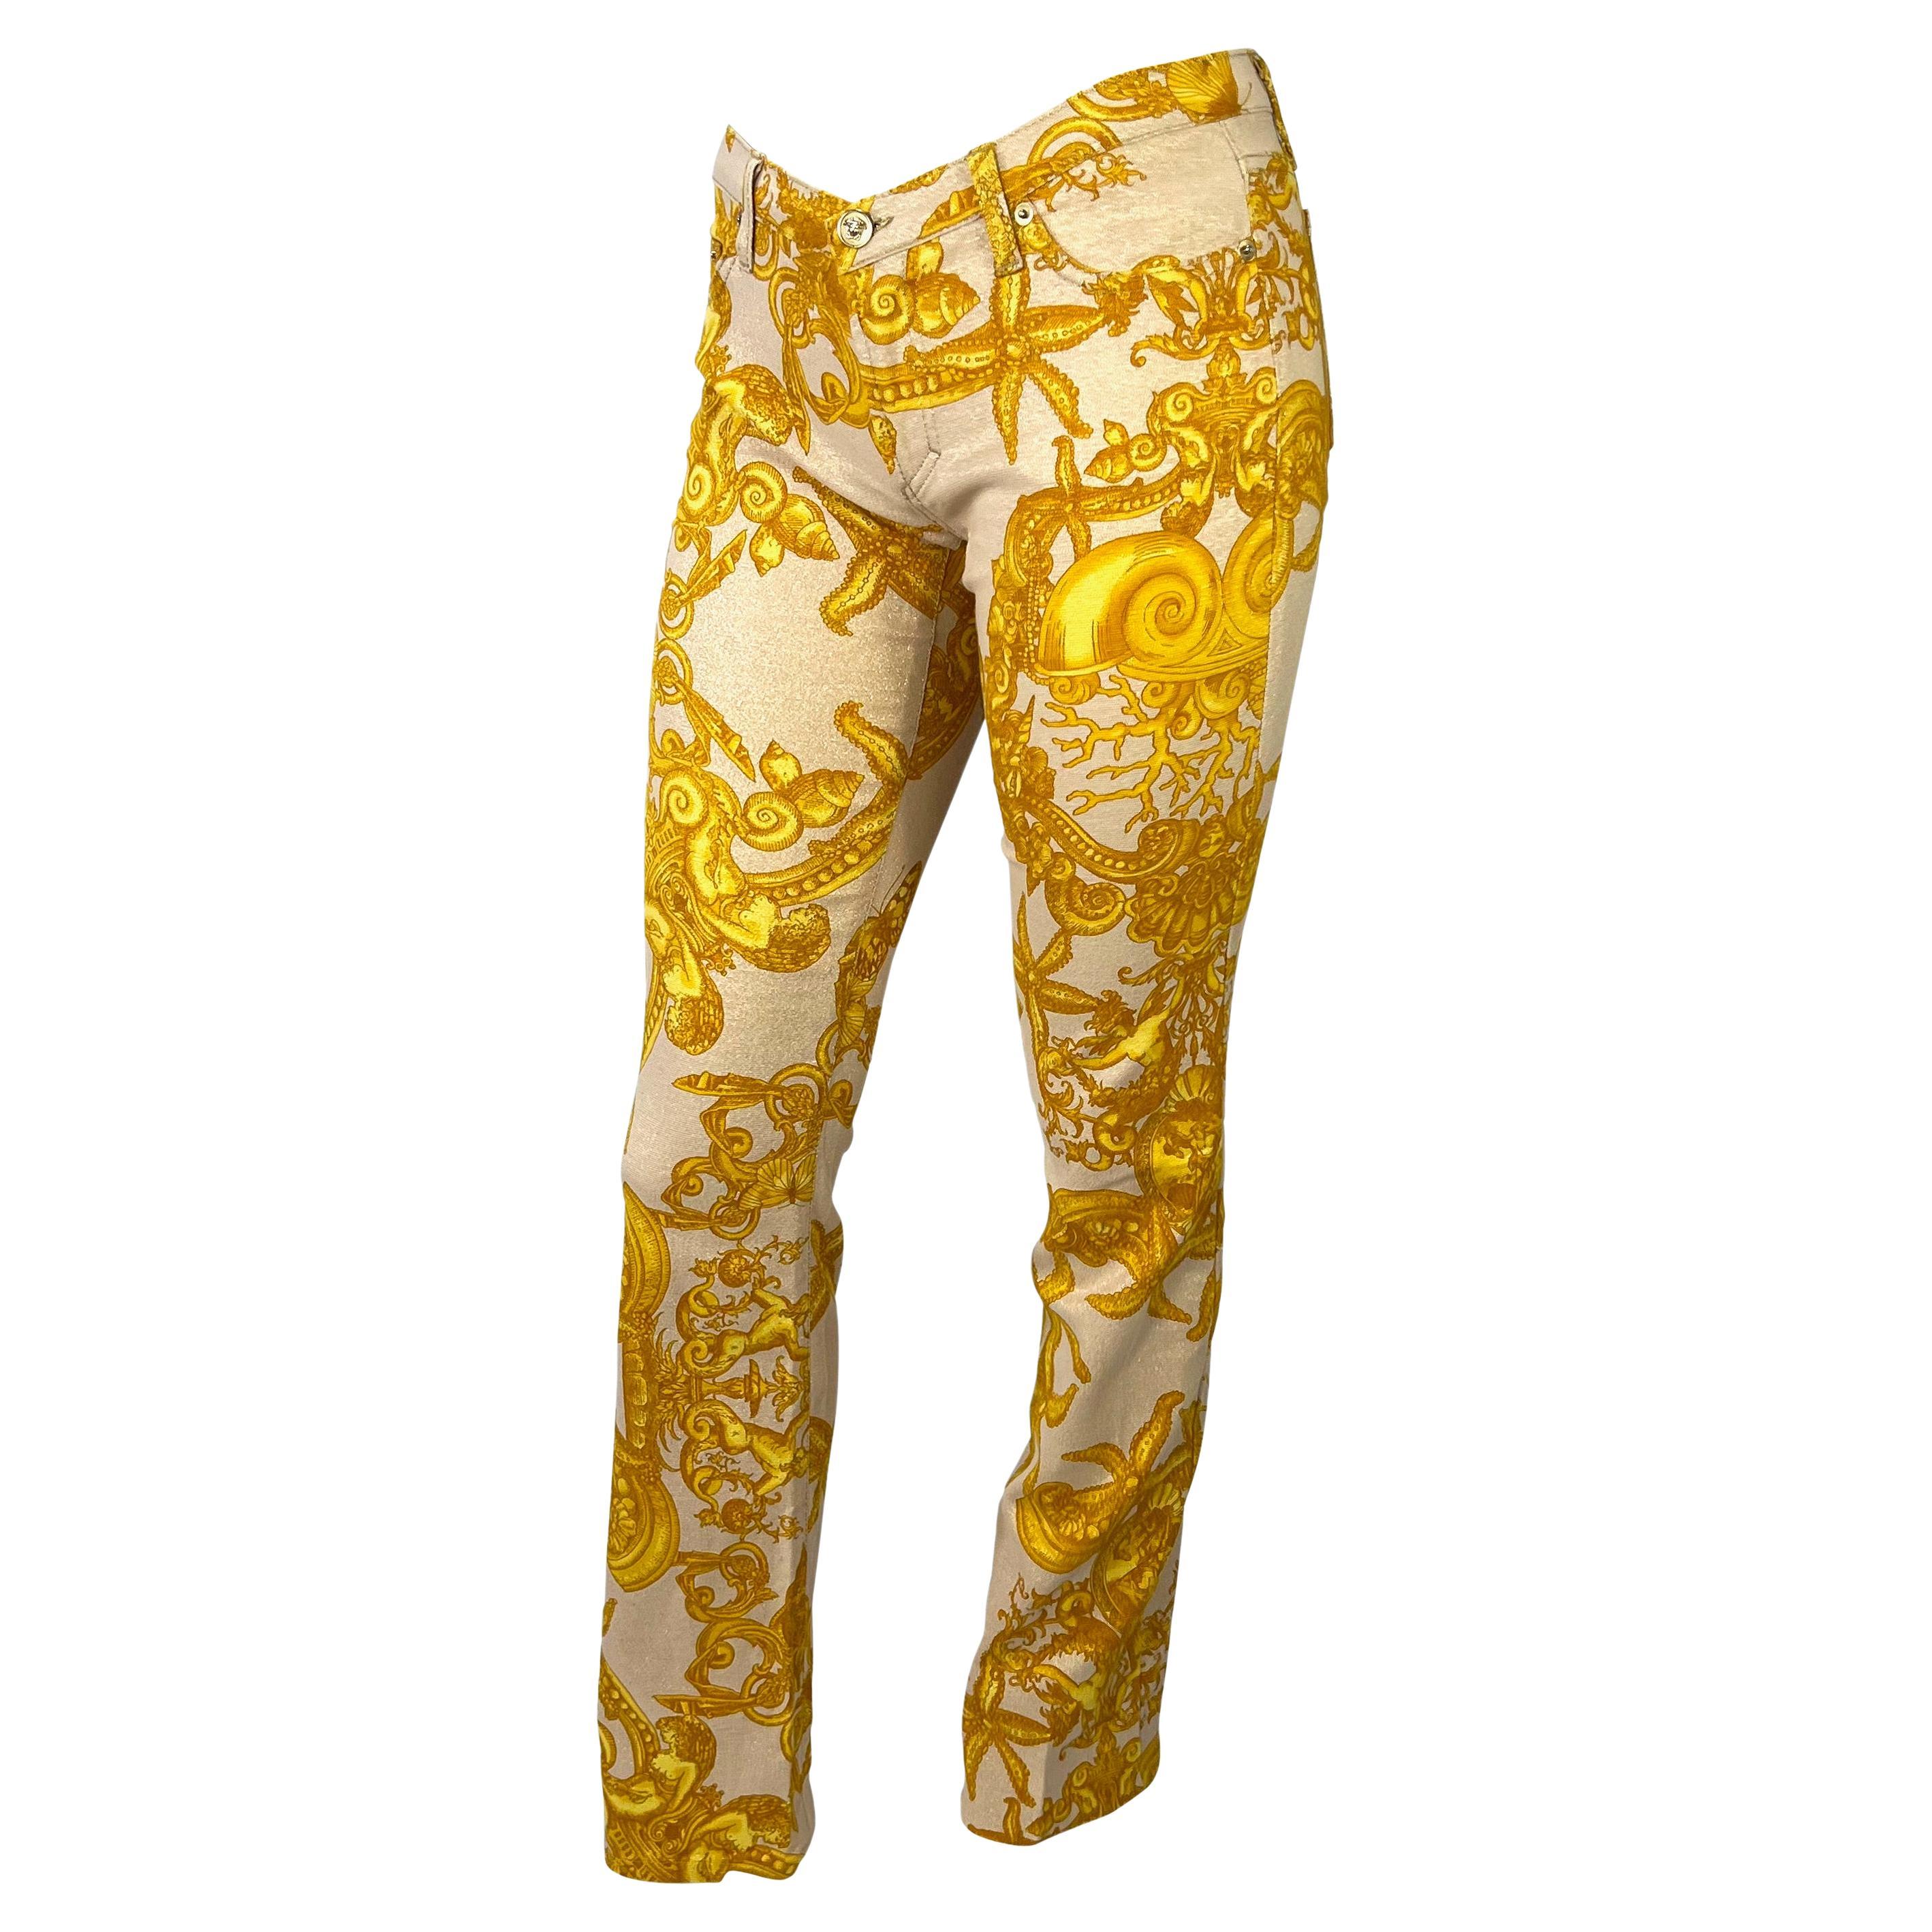 S/S 2005 Versace by Donatella Metallic Gold Tresor la Mer Print Medusa Logo Pant In Excellent Condition For Sale In West Hollywood, CA